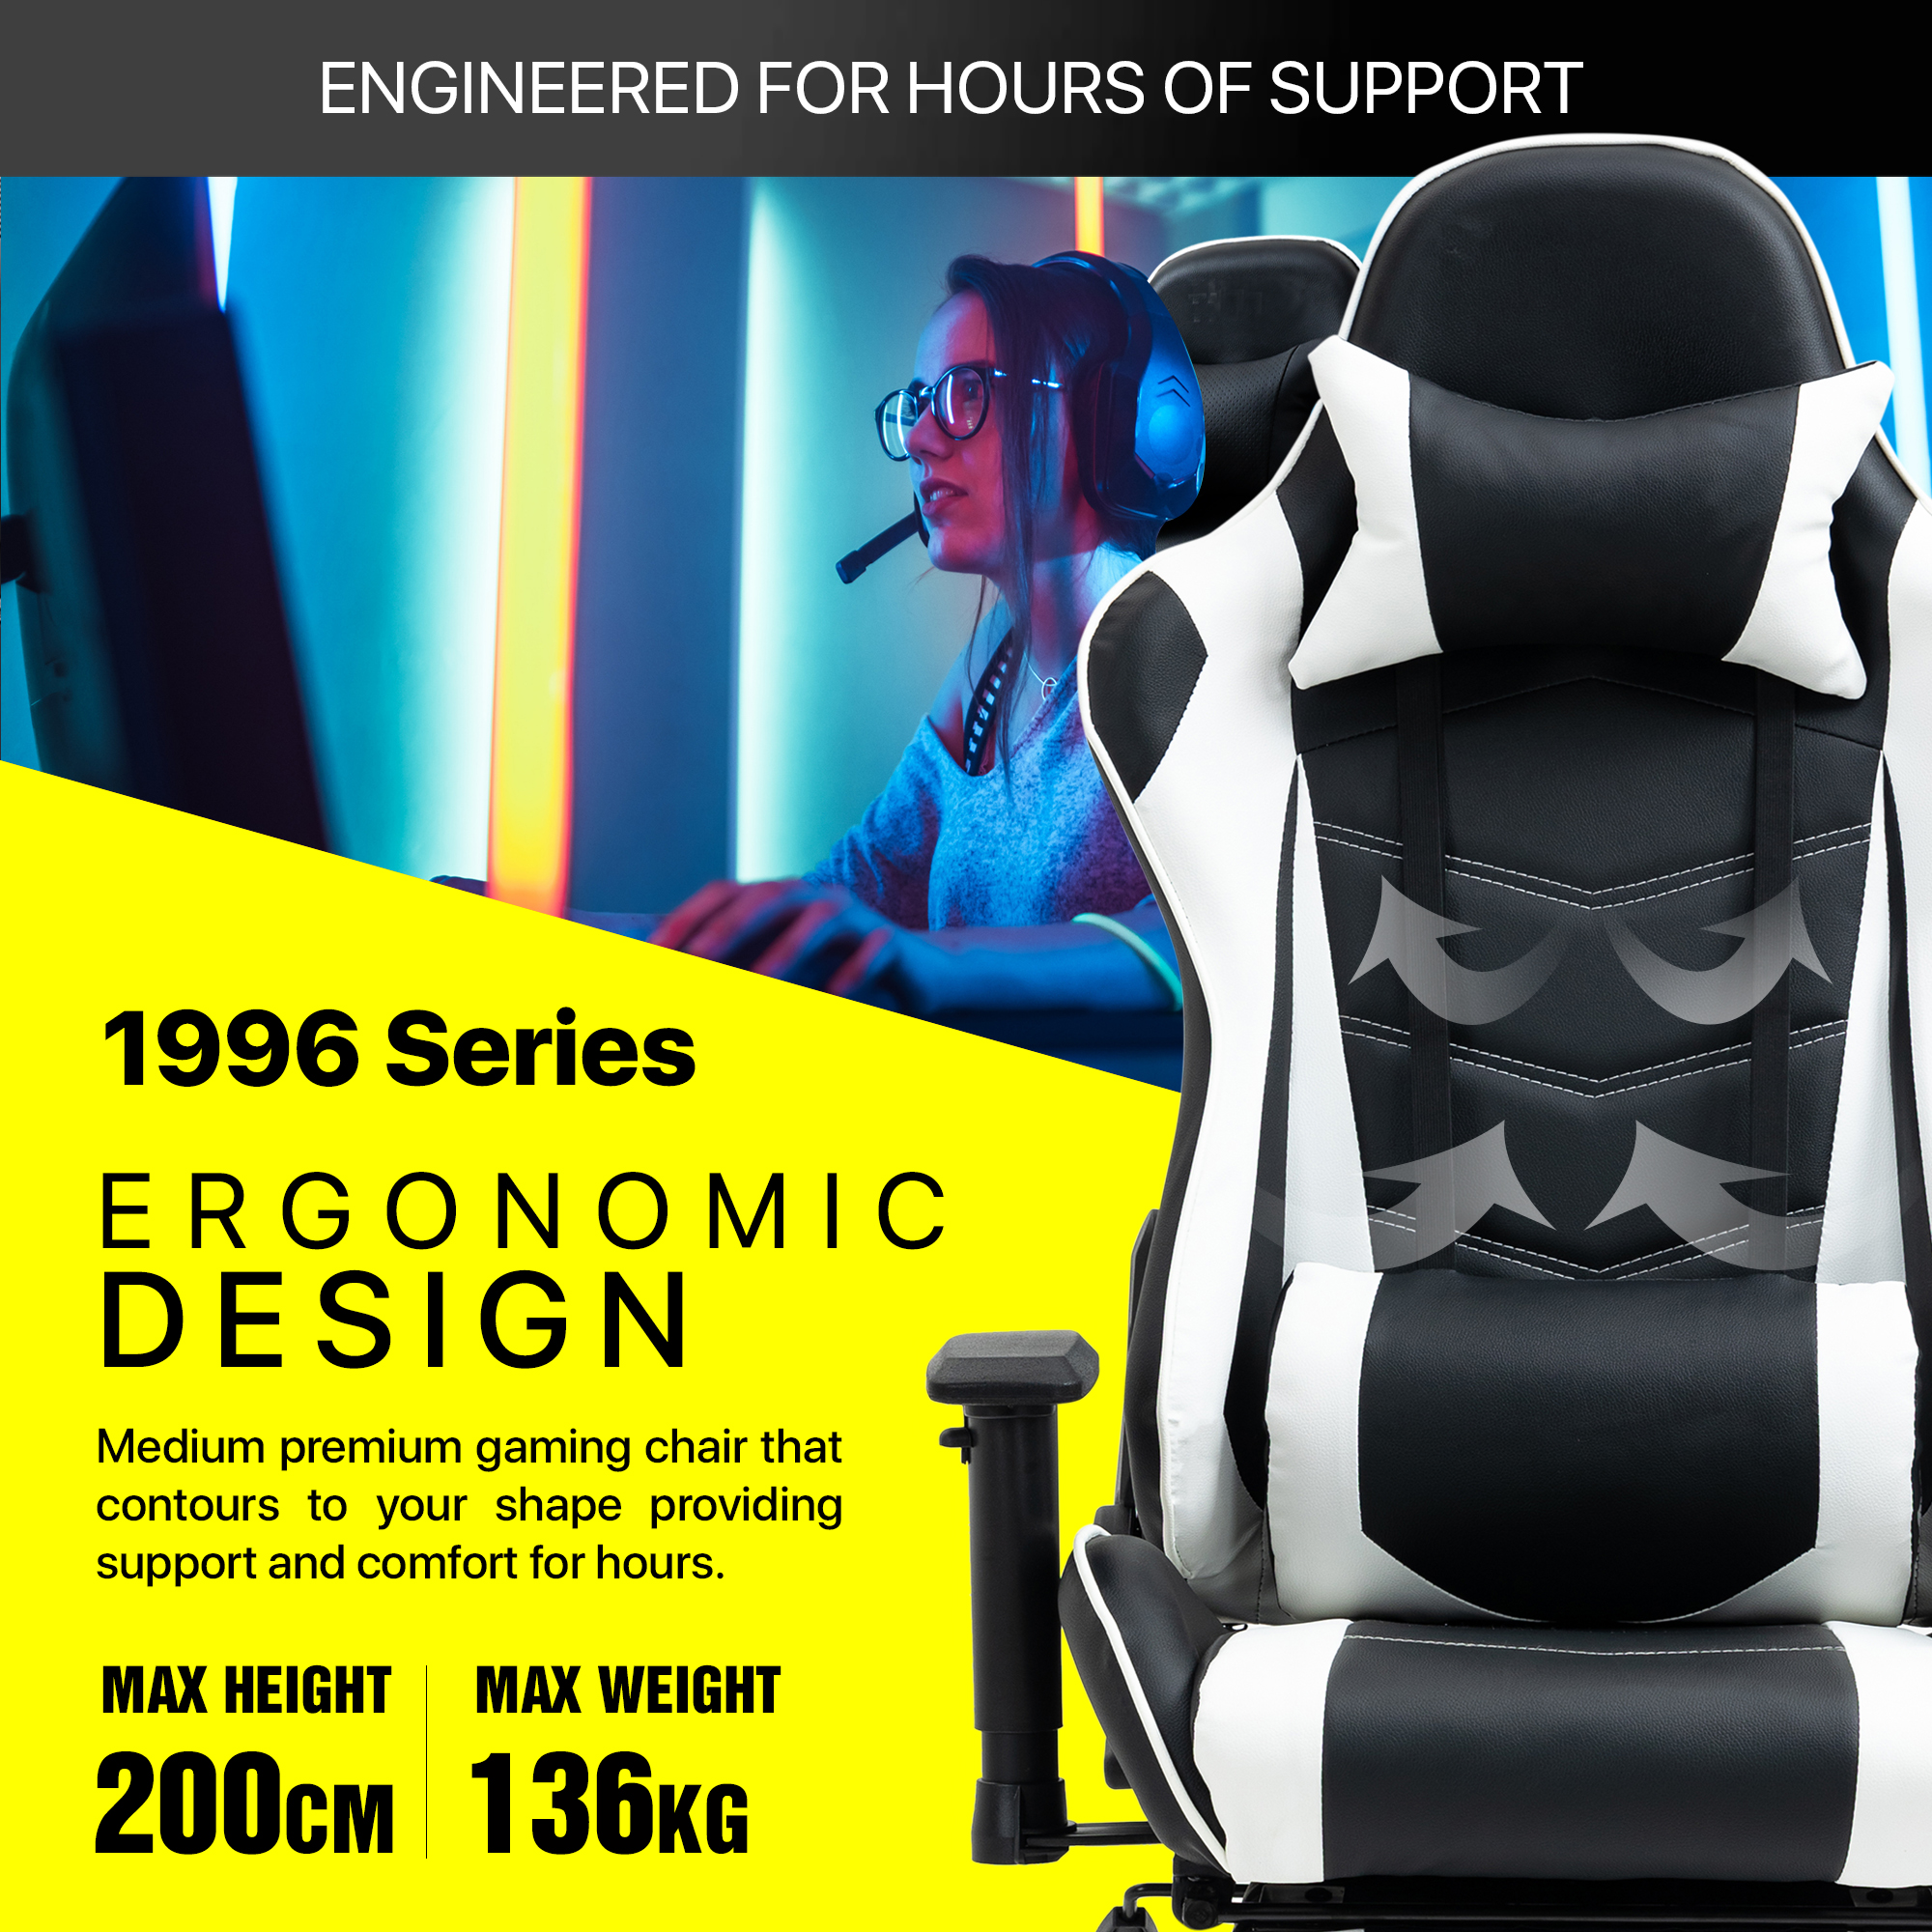 The thick padded bucket seat is designed to hug your back that provides great support and a natural